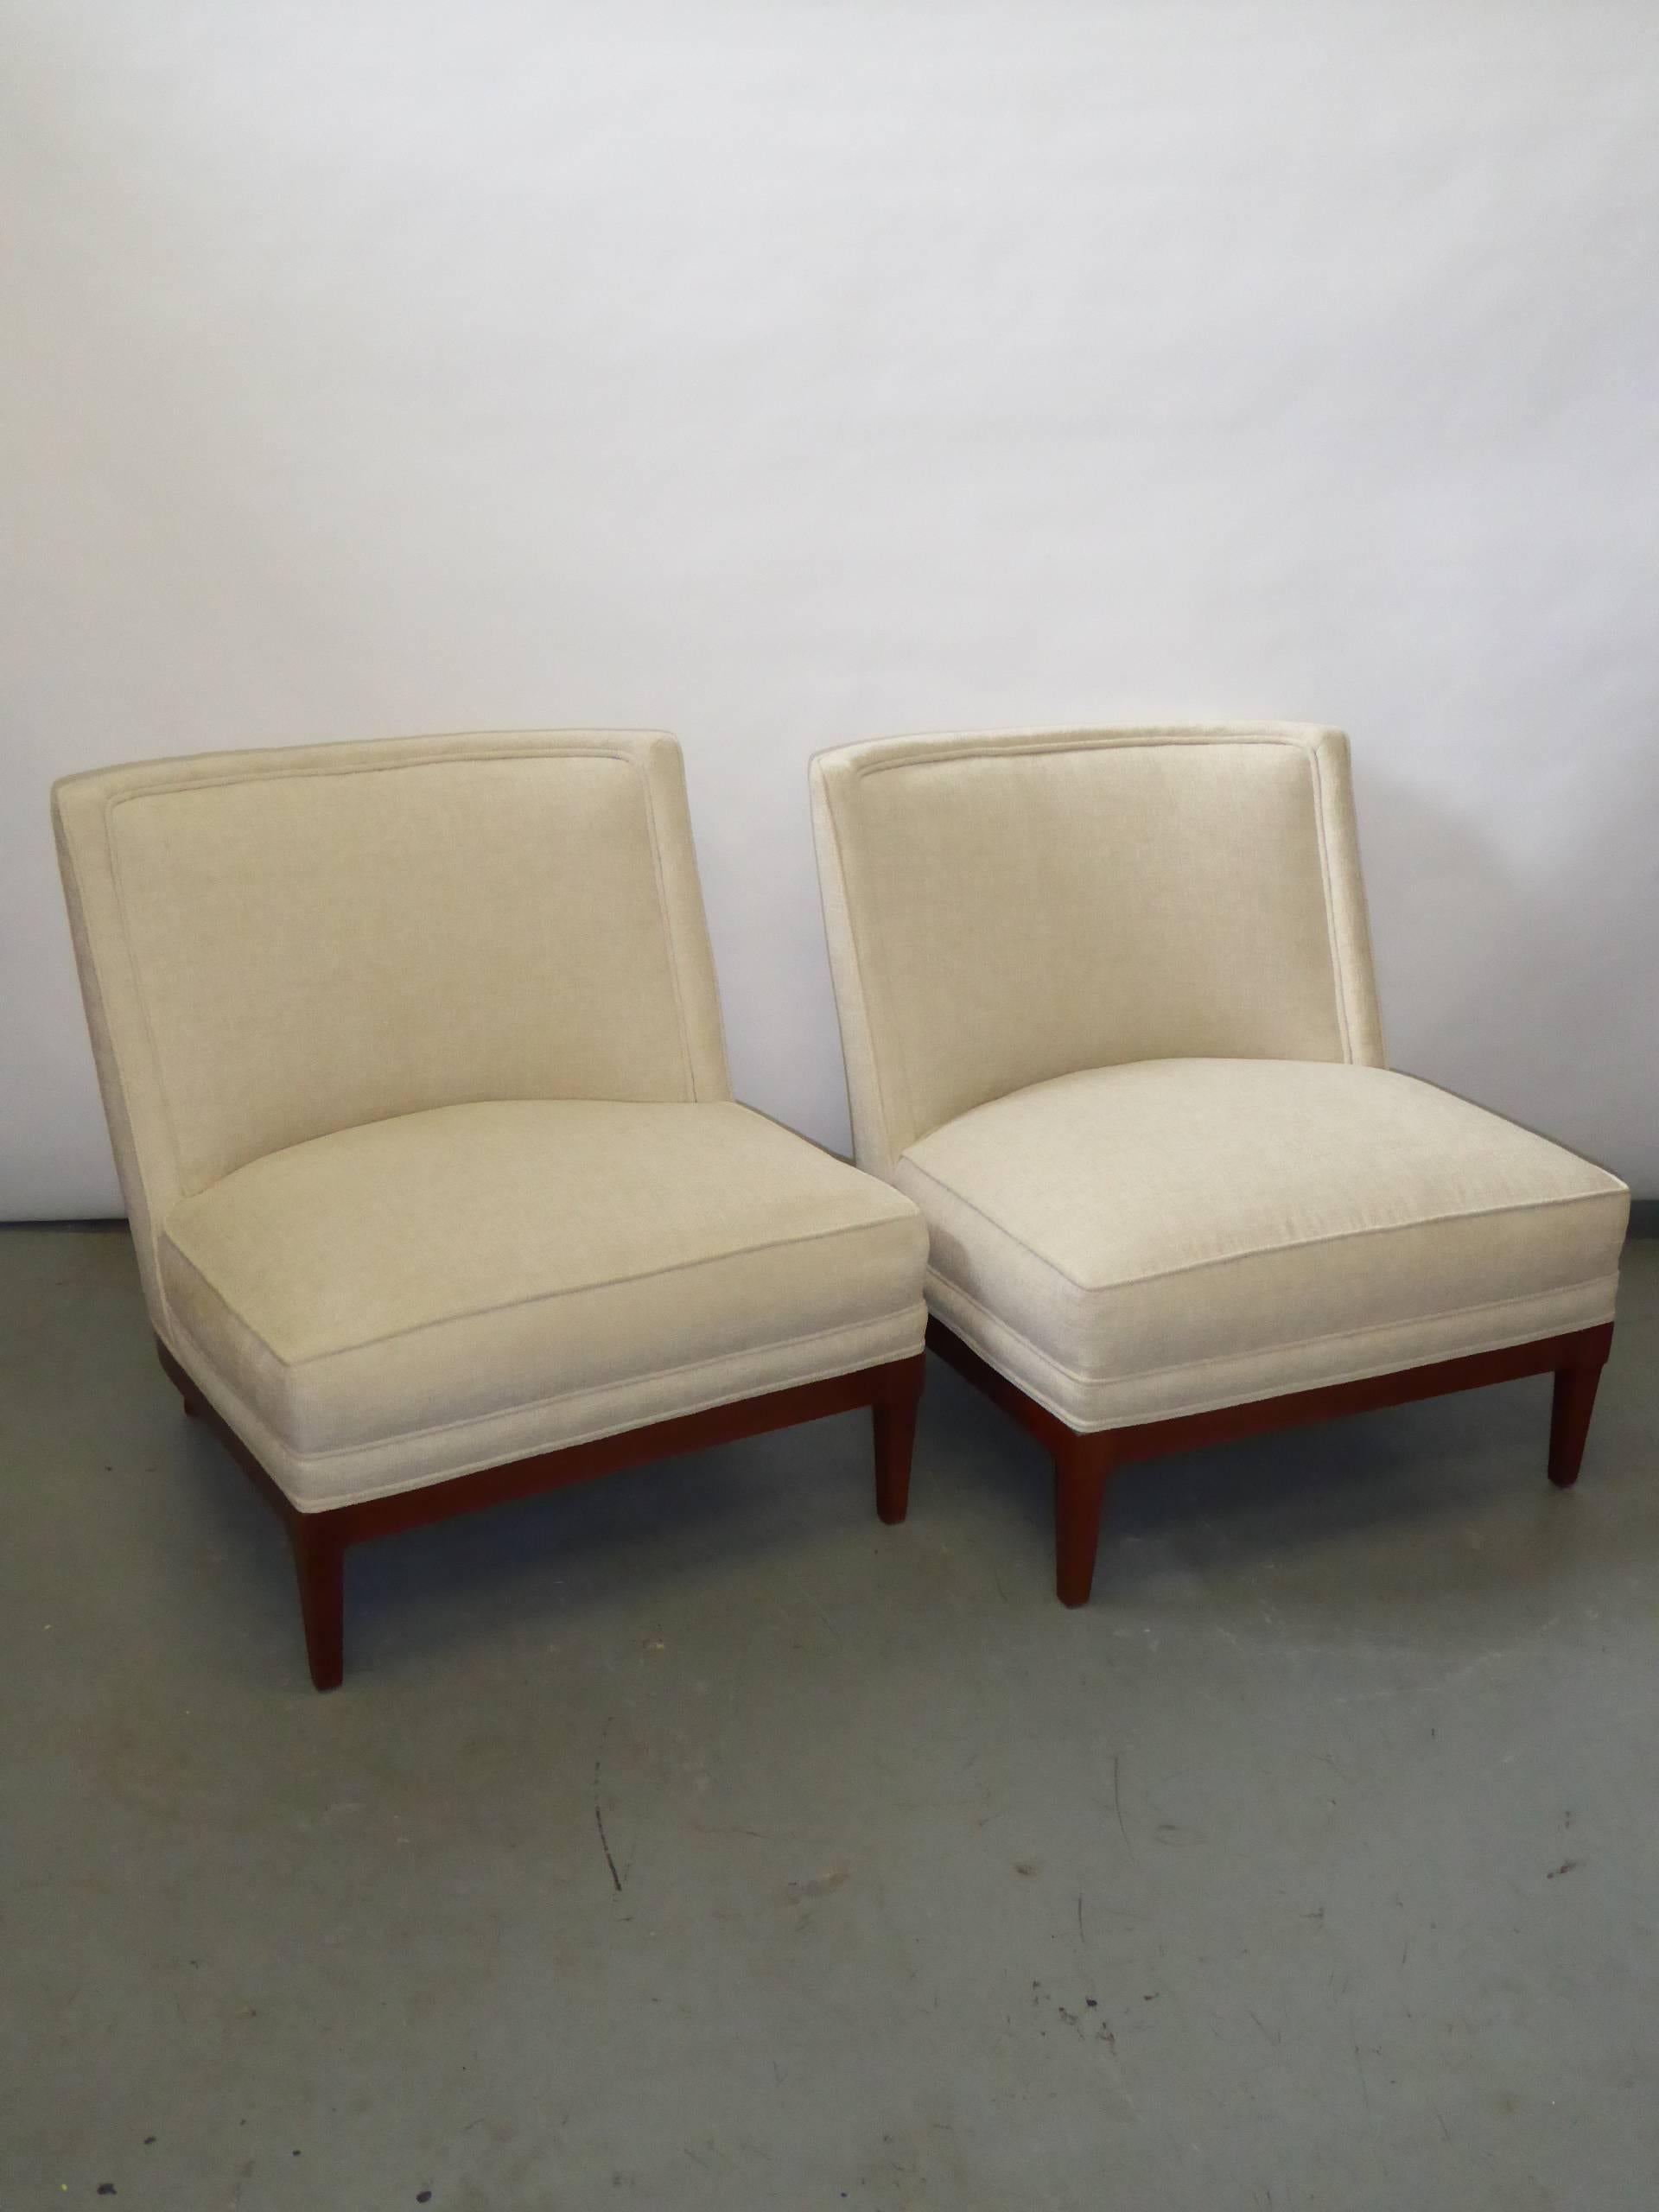 SOLD  Sleek, urbane and sophisticated pair of round back Lounge Chairs or Slipper Chairs in the style of William 